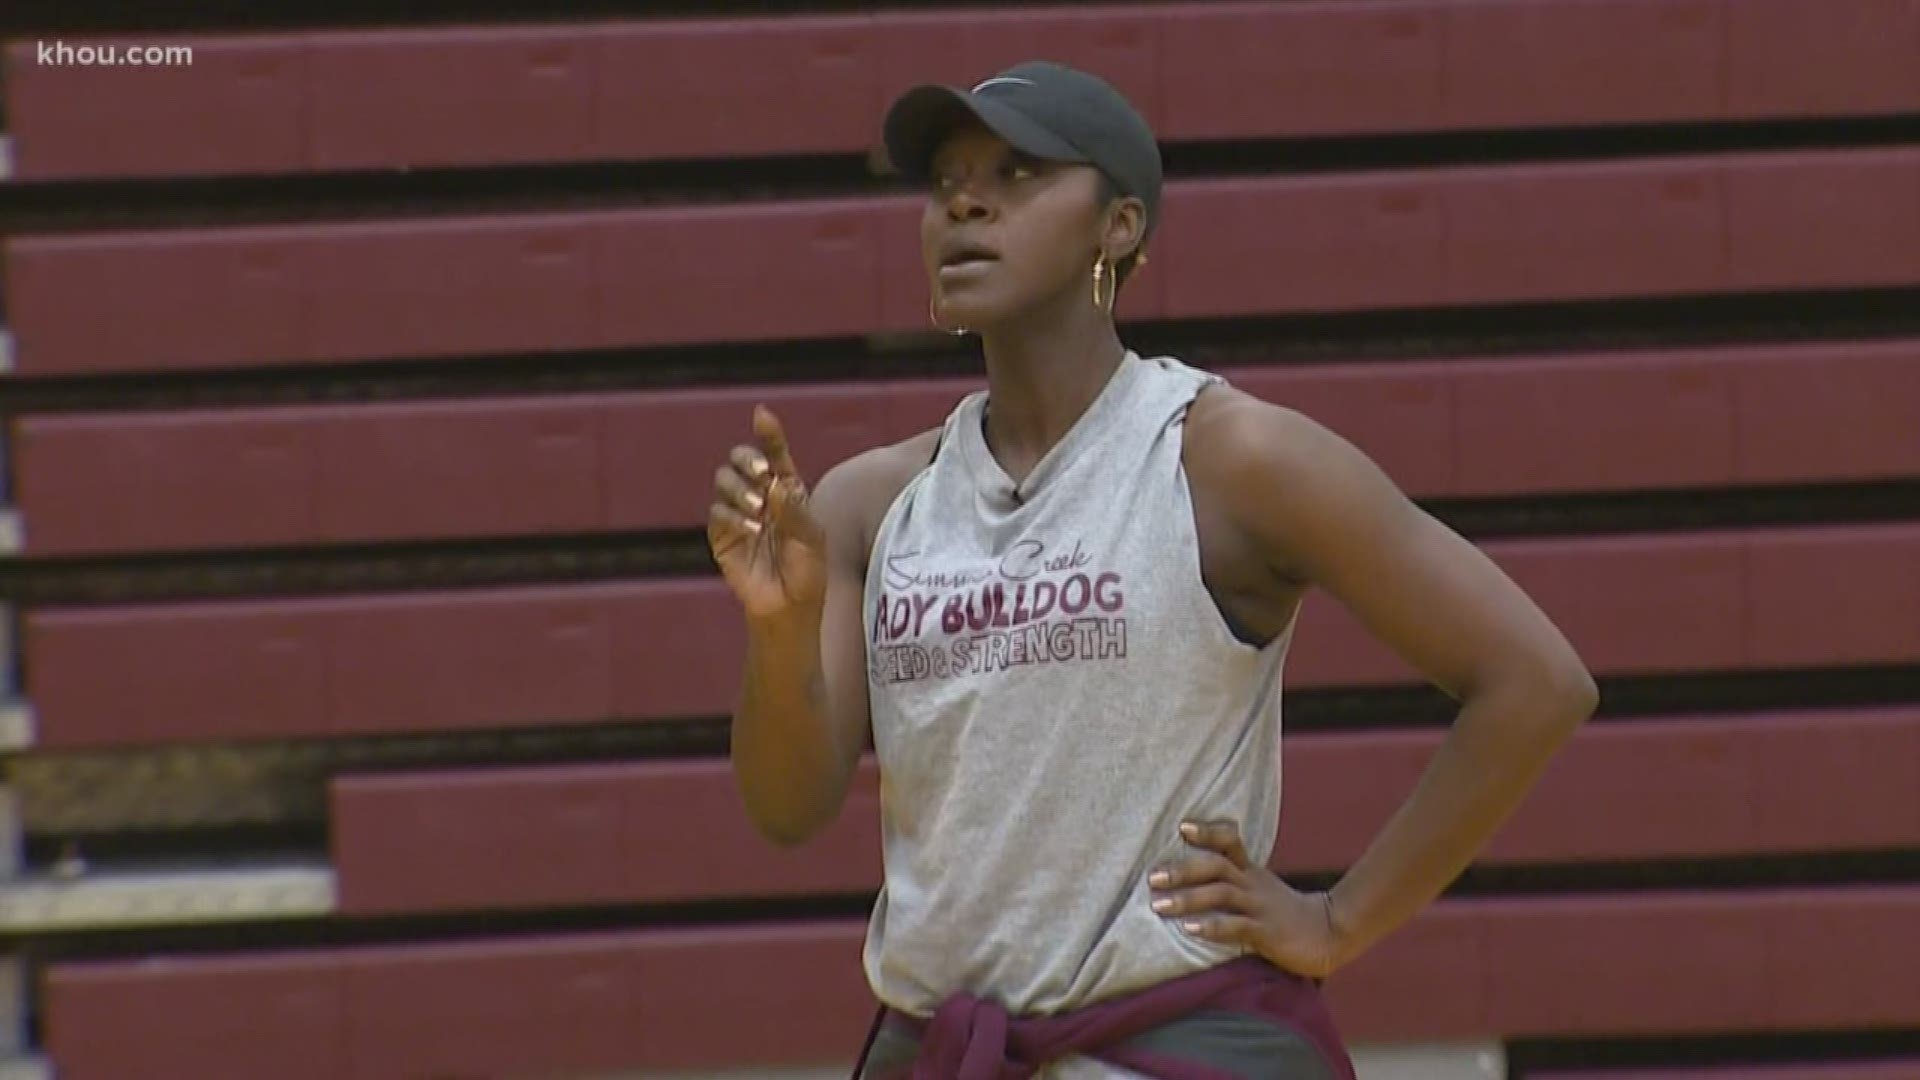 The Summer Creek High School girls basketball team is heading to state for the first time, but its secret weapon has been down this path before.